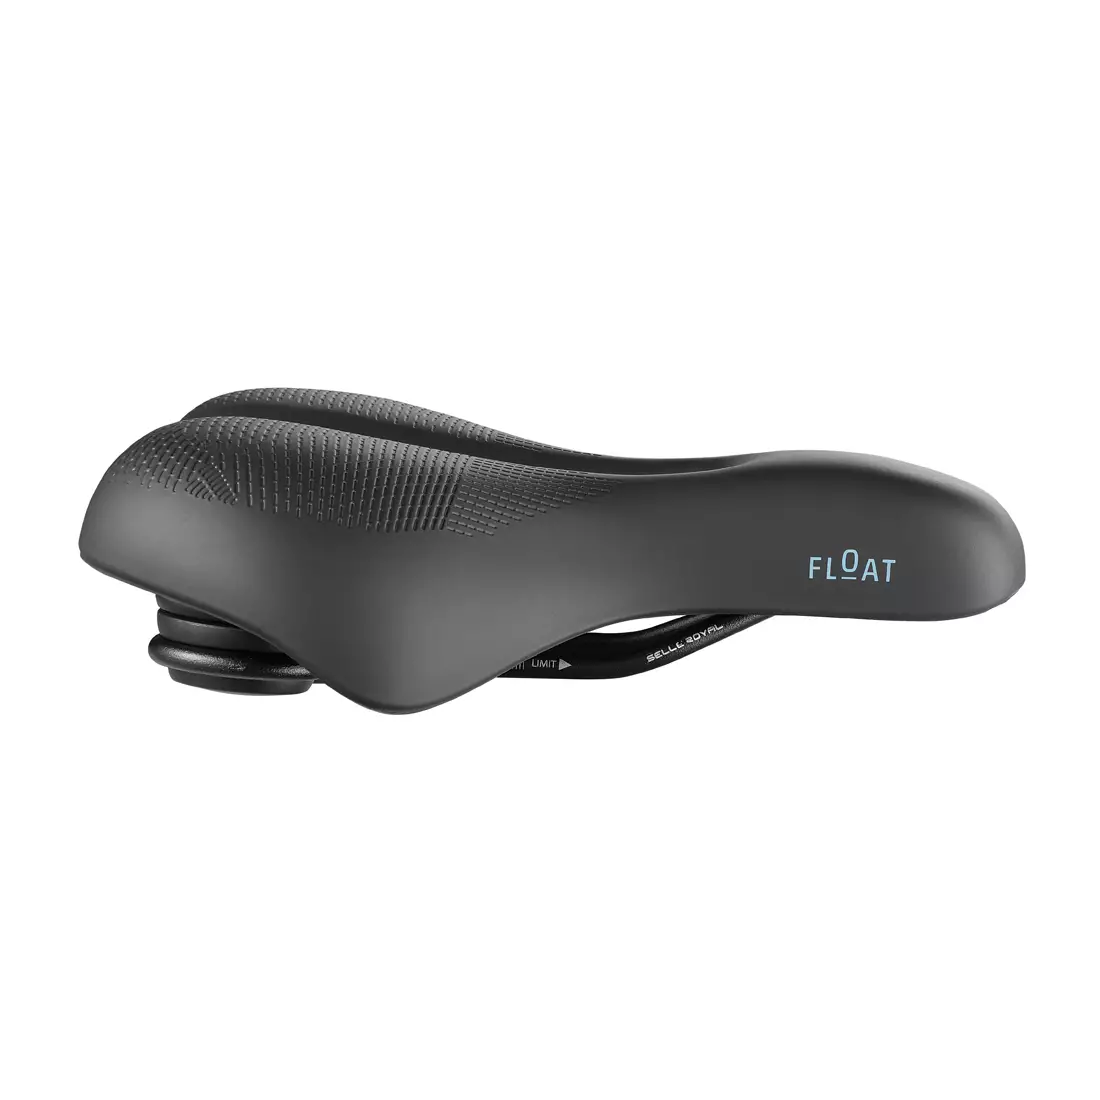 Bicycle saddle SELLEROYAL CLASSIC RELAXED 90st. FLOAT unisex  SR-8VC3UE0A08V14